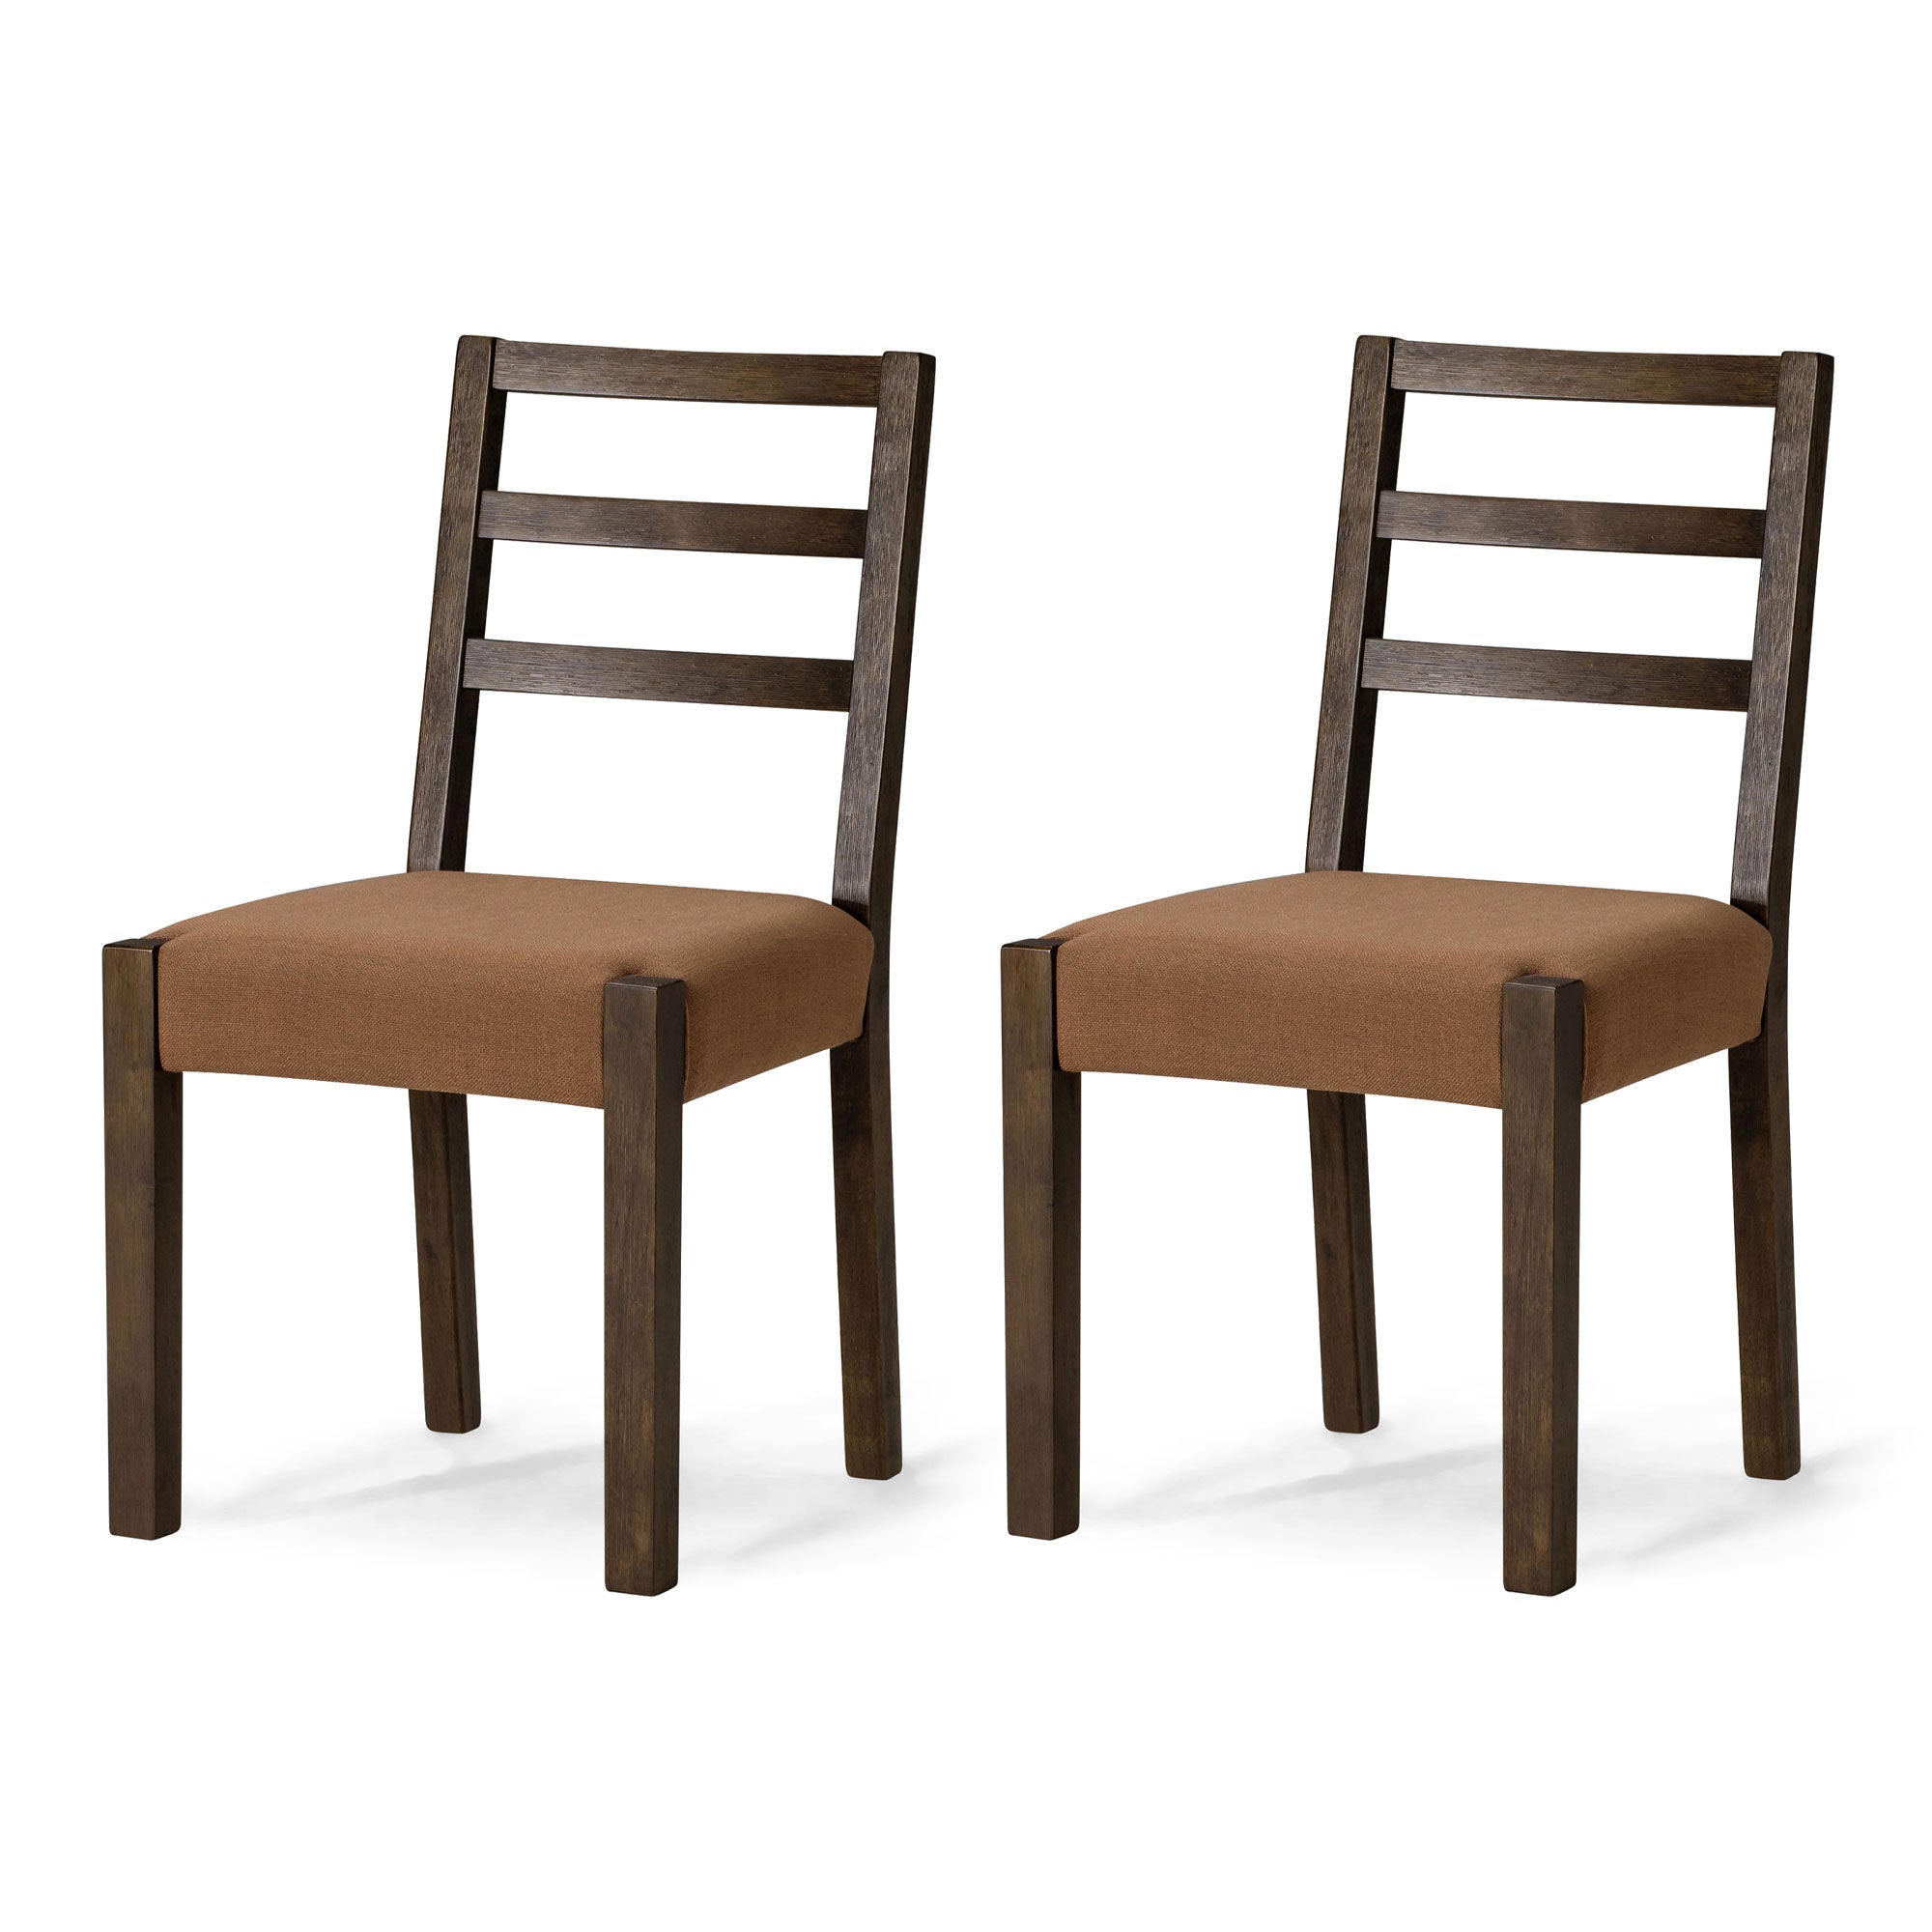 Maven-Lane-Willow-Rustic-Dining-Chair,-Brown-With-Clay-Canvas-Fabric,-Set-of-2-Kitchen-&-Dining-Room-Chairs